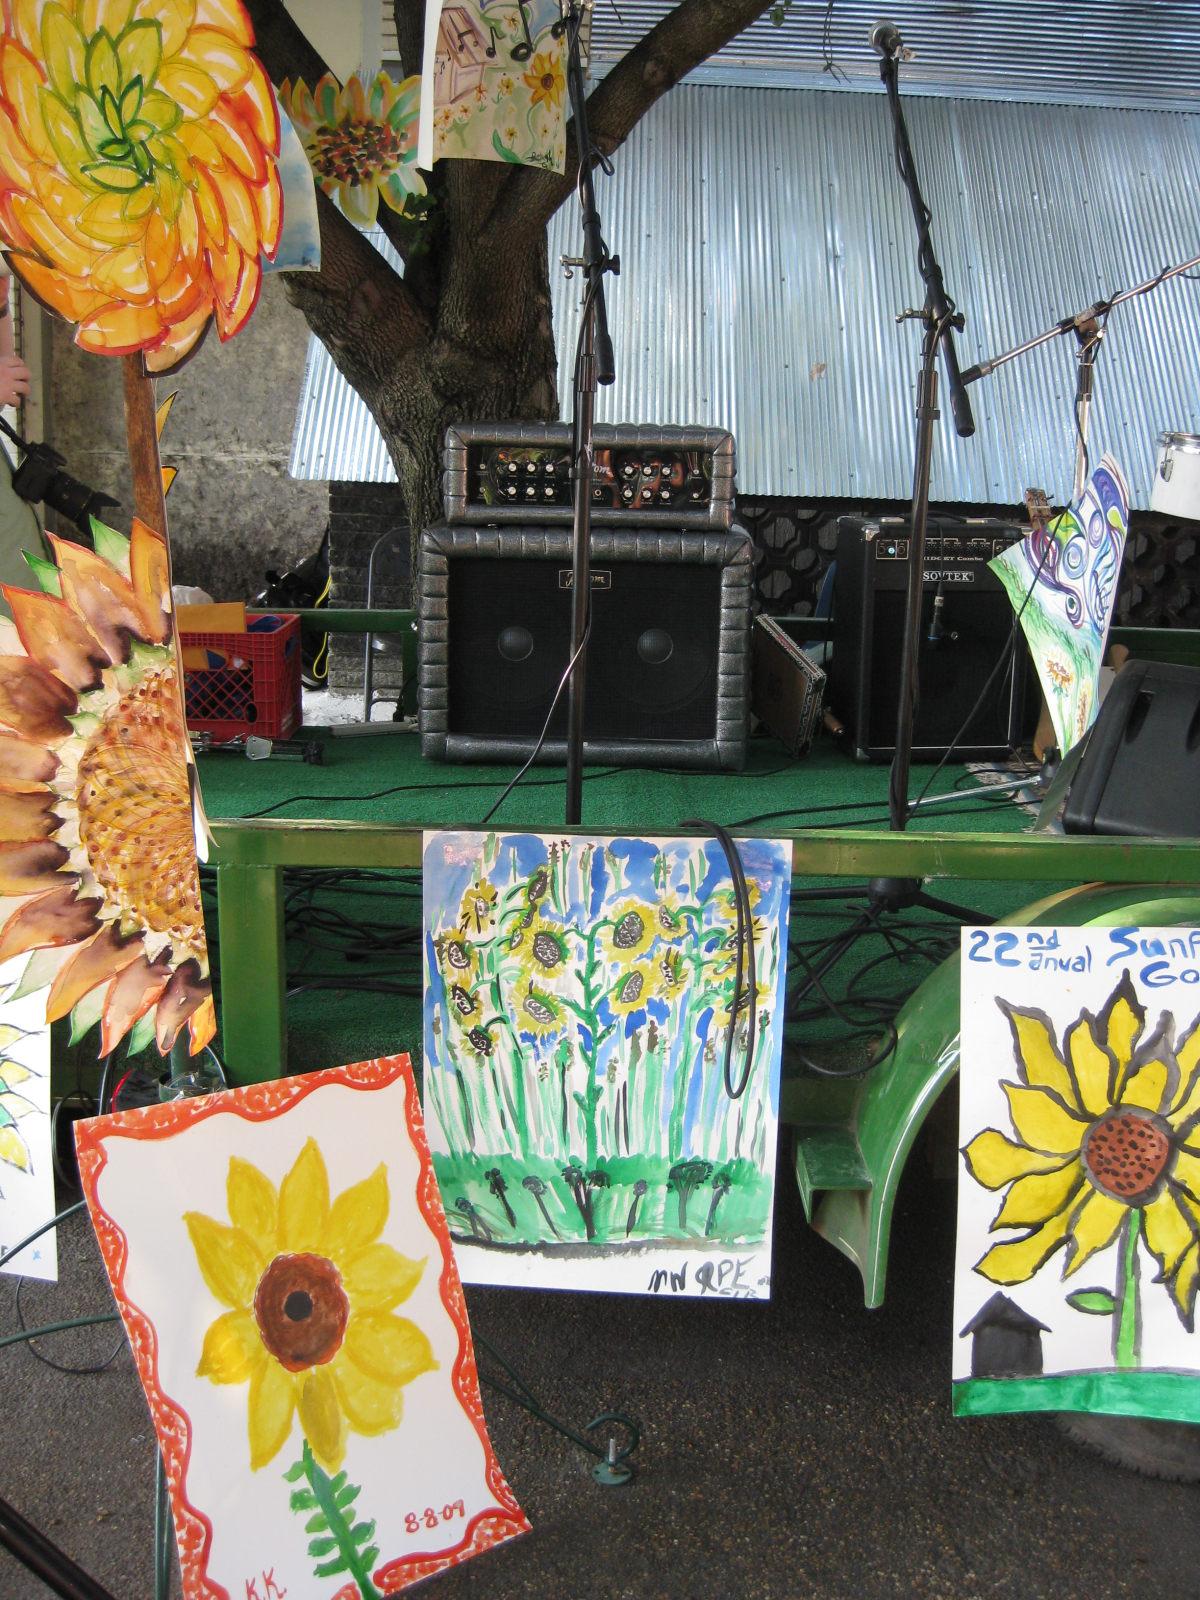 A display of sunflower-themed artwork made by festival-goers